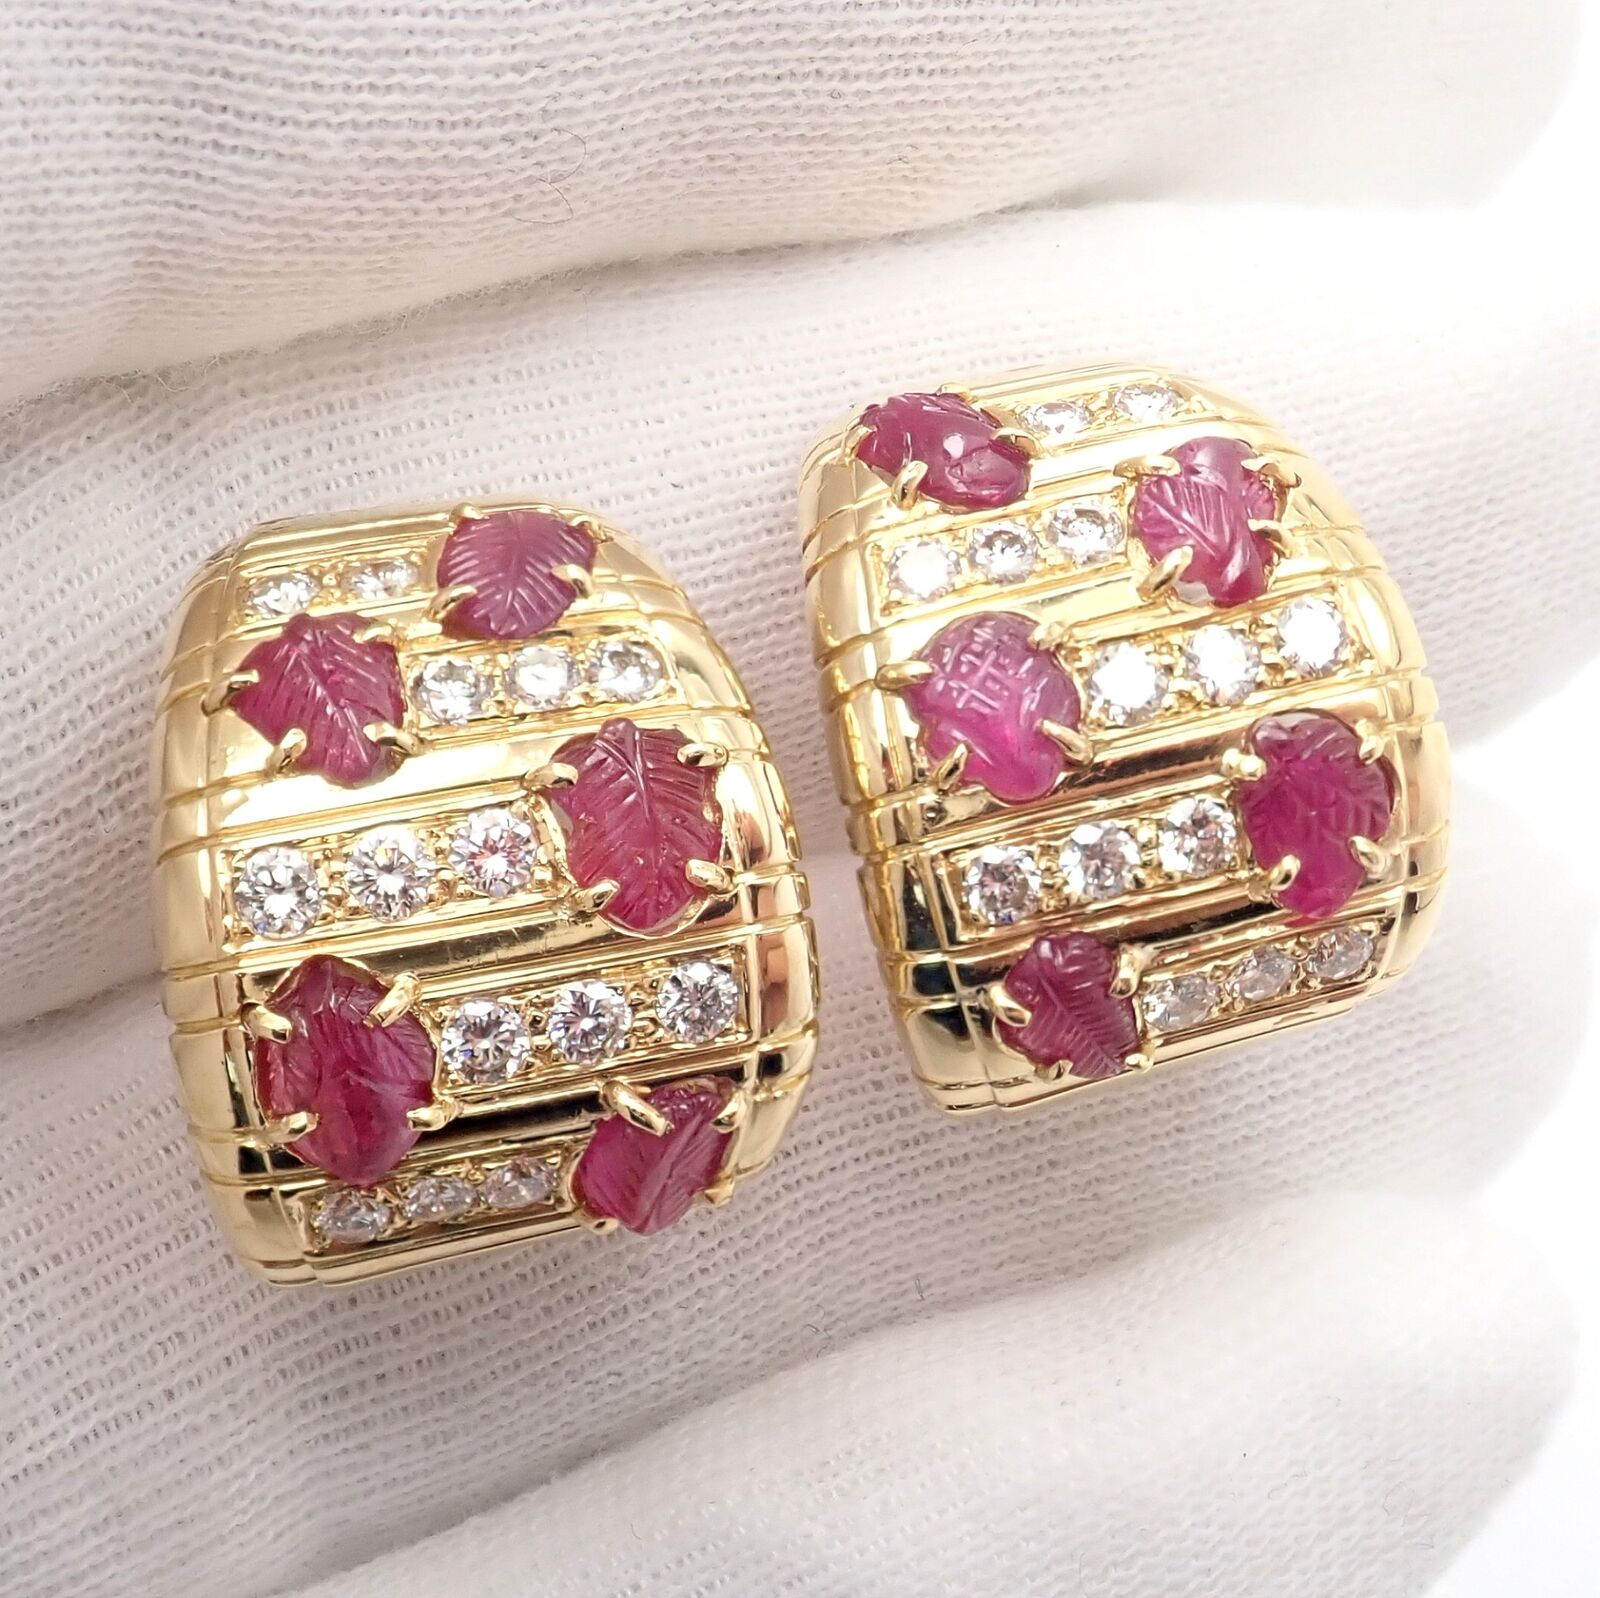 Andrew Clunn Jewelry & Watches:Fine Jewelry:Earrings Rare Vintage! Andrew Clunn 18k Yellow Gold Diamond Carved Leaf Ruby Earrings